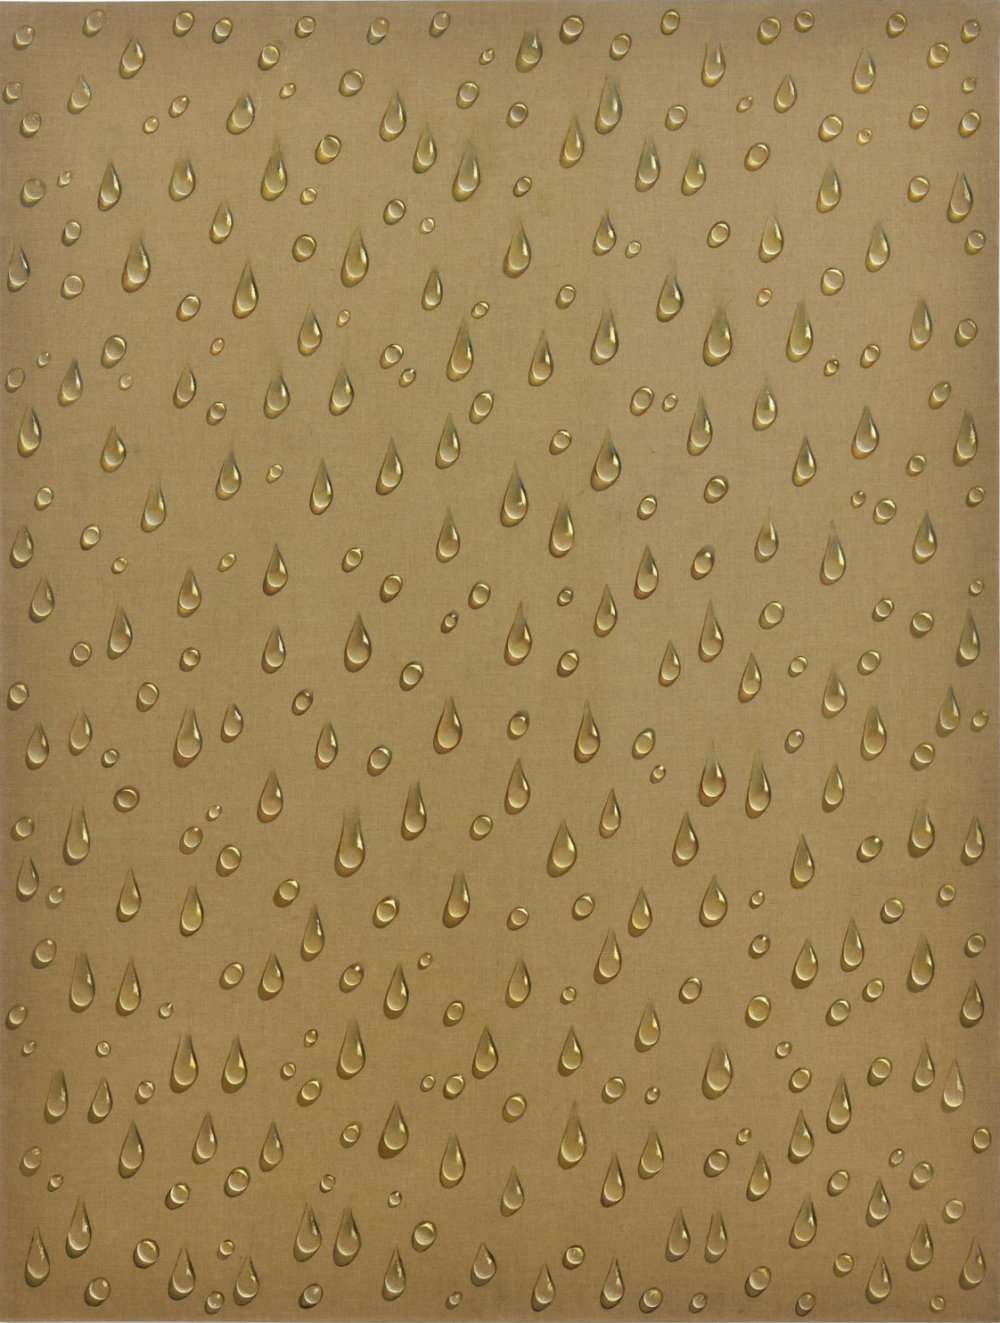 Impressive Hyper Realistic Paintings Of Gleaming Water Drops By Kim Tschang Yeul 13